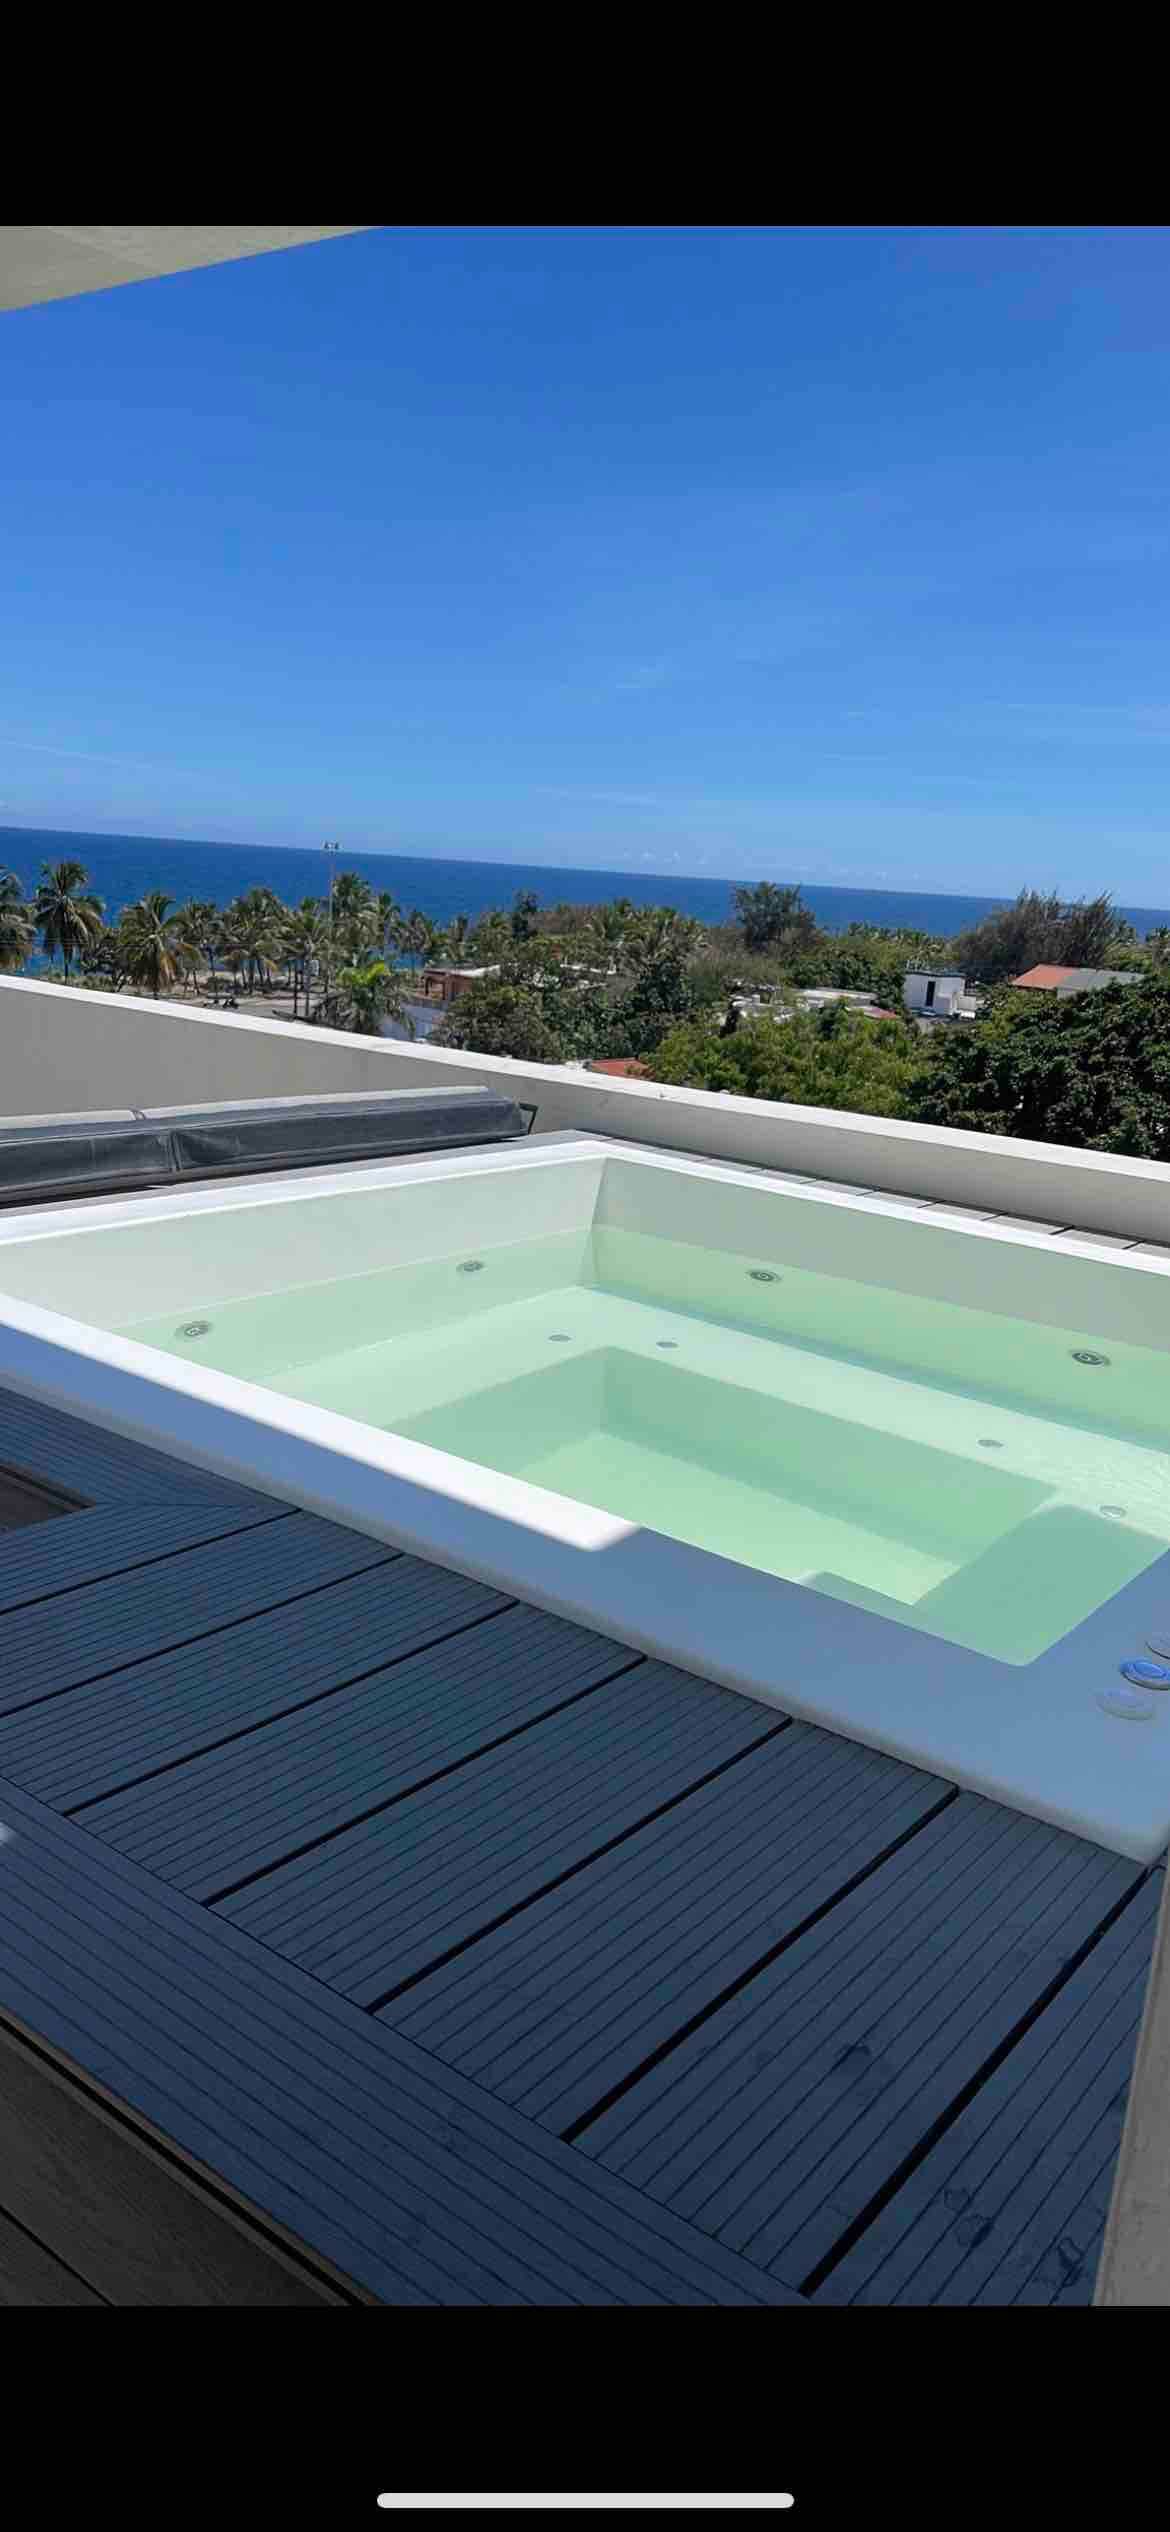 2 bedroom vacation-home with PRIVATe Jacuzzi.